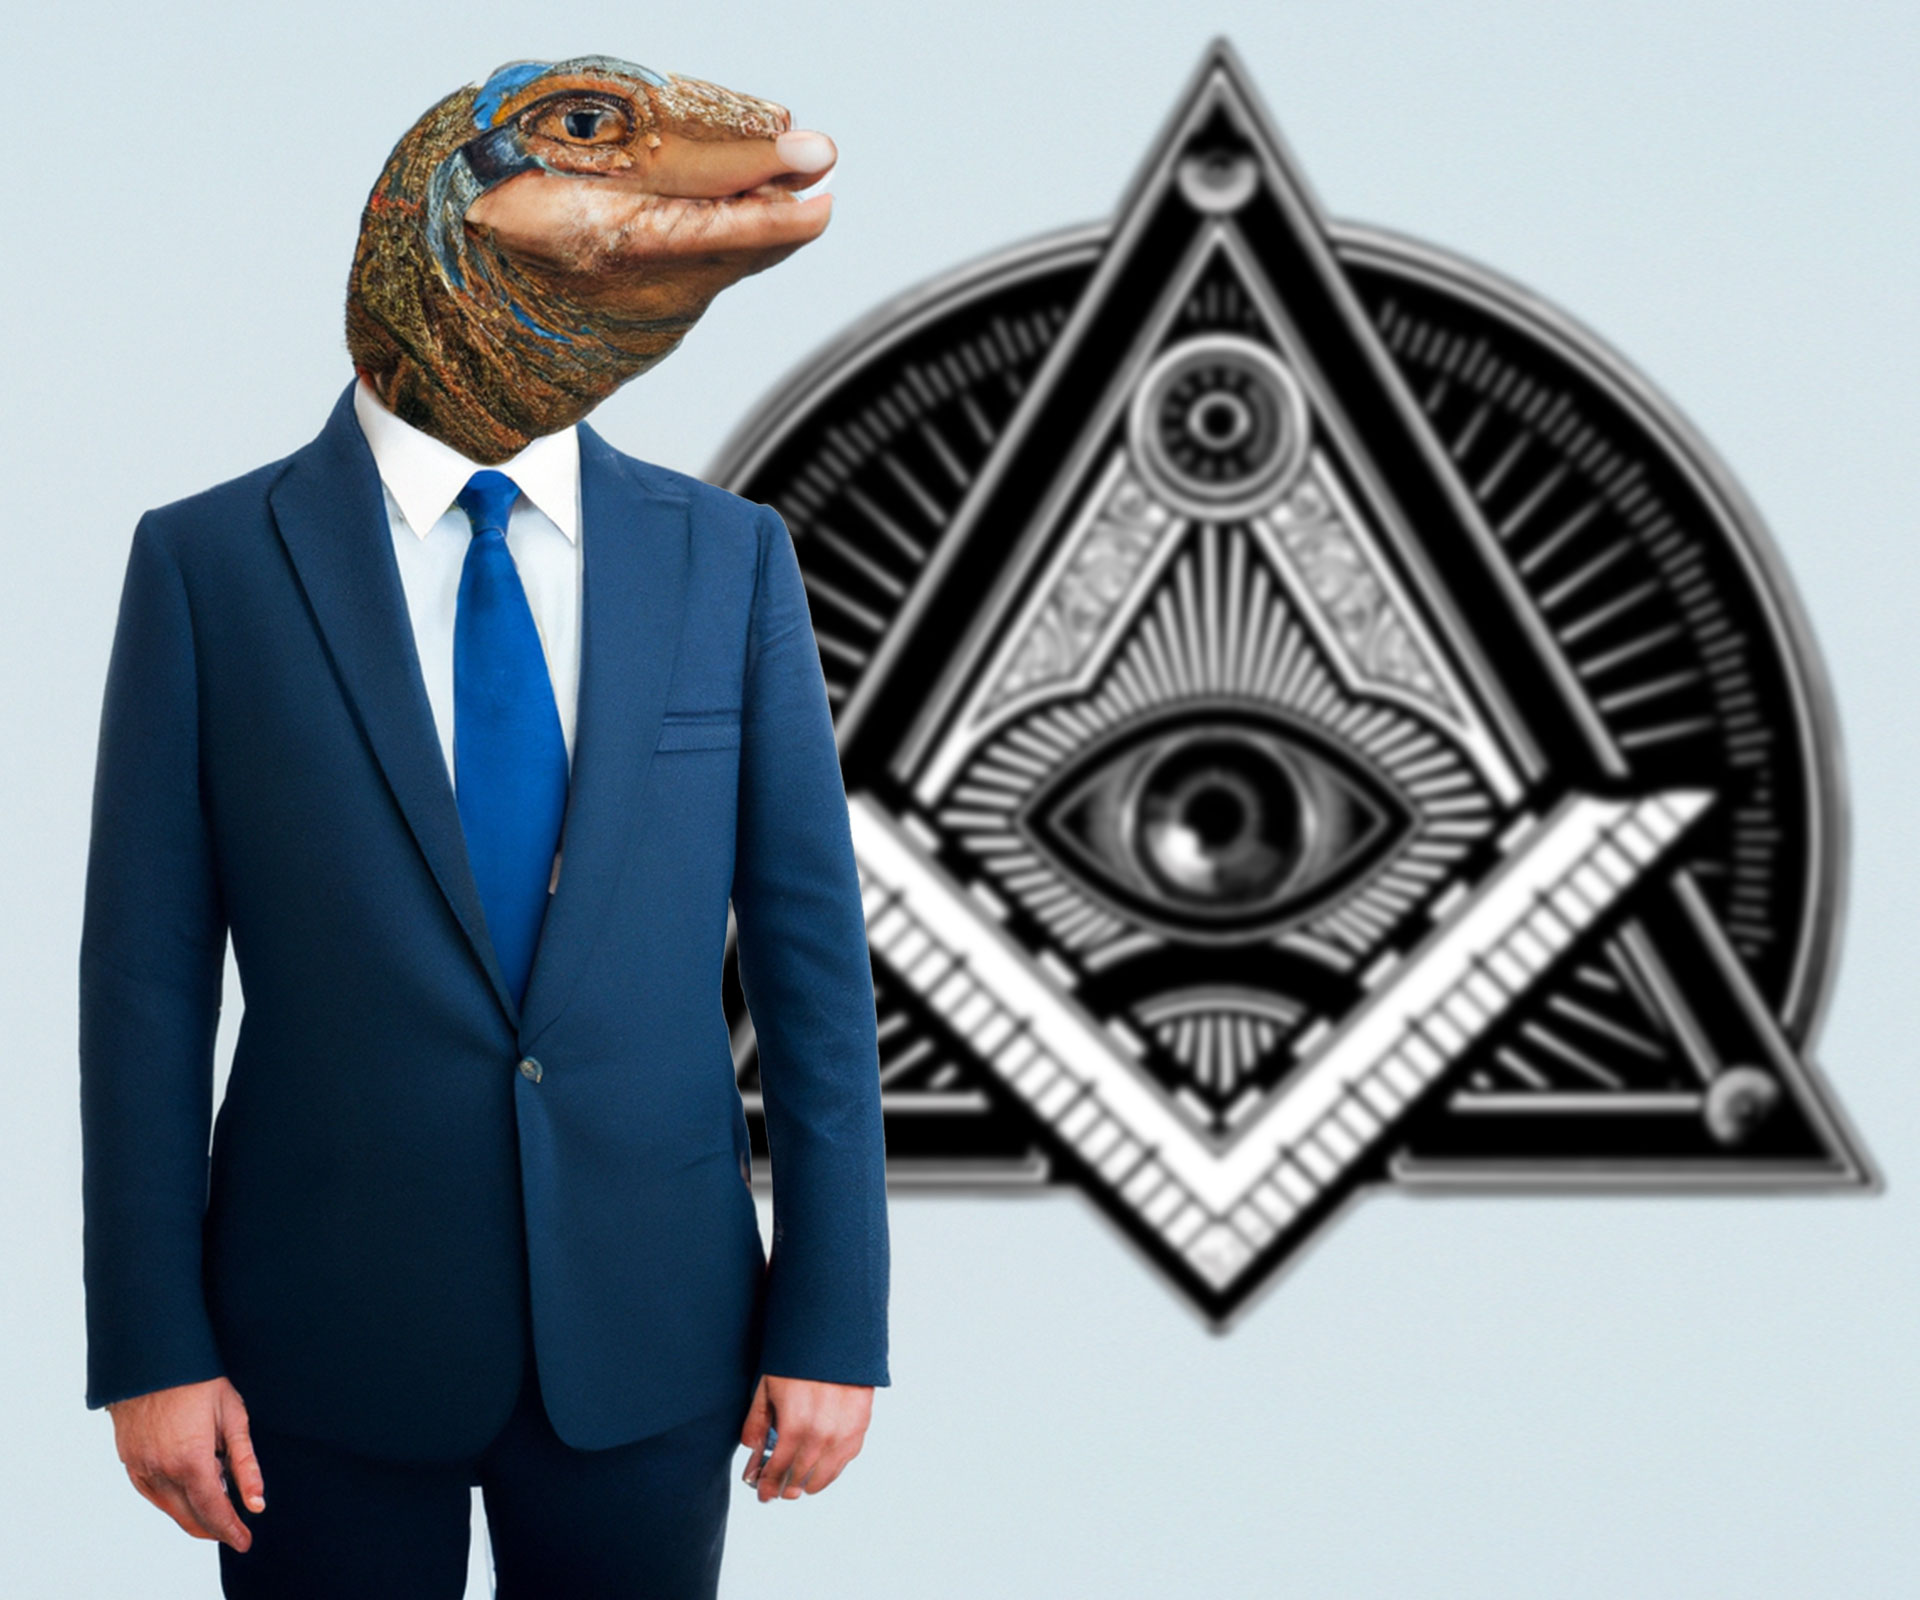 The Lizard People Reptilian Conspiracy: Unveiling the Truth